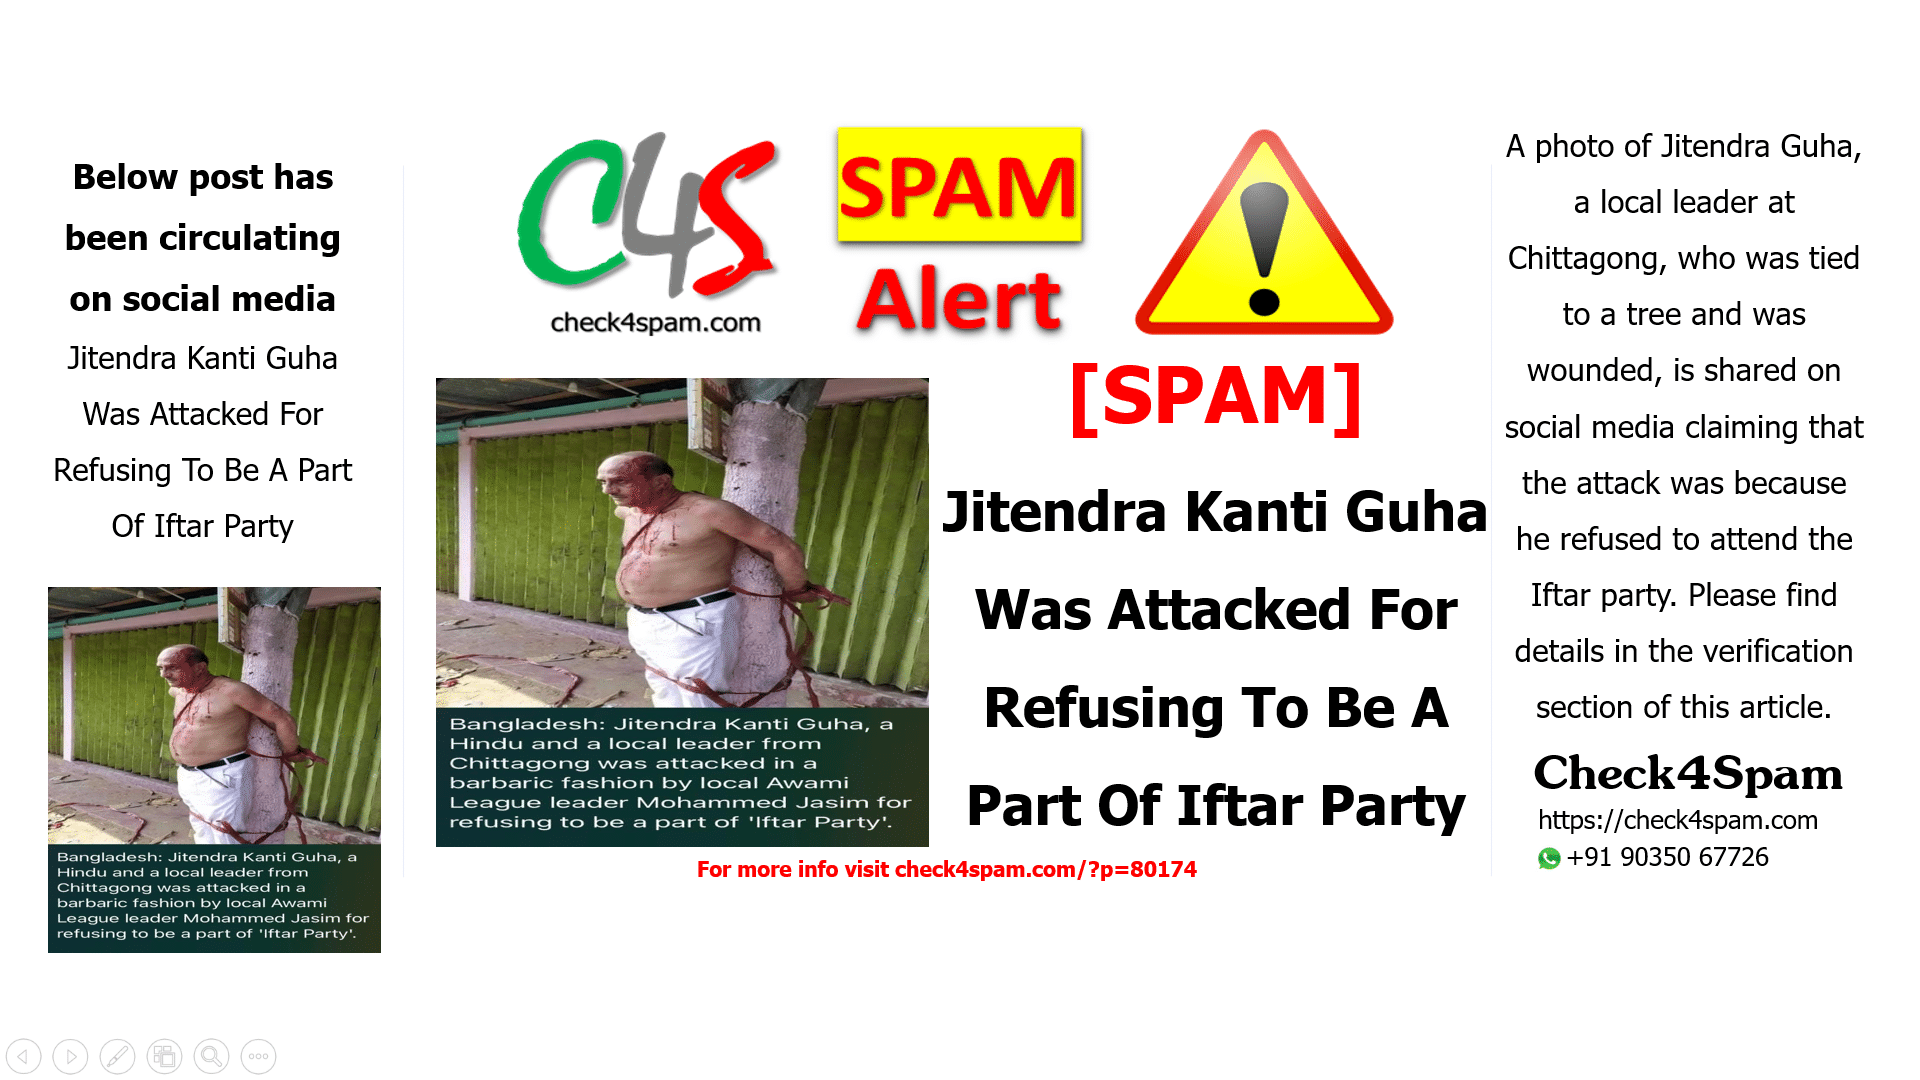 Jitendra Kanti Guha Was Attacked For Refusing To Be A Part Of Iftar Party